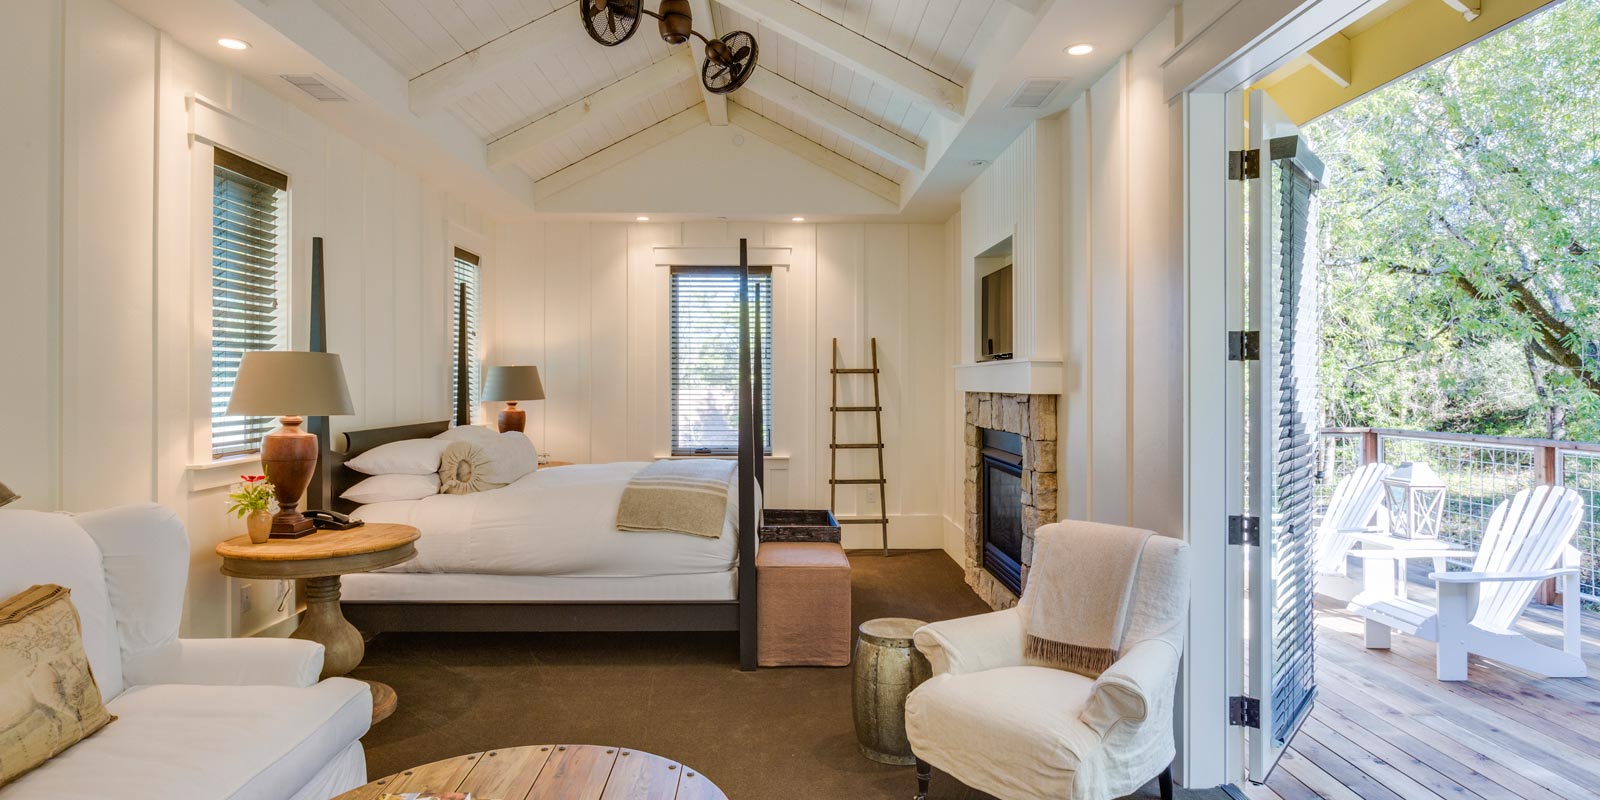 interior of Barn Junior Suite with ceiling fan, large bed with white bedding, white chair and love seat. porch door is open to a wood deck with white patio chairs